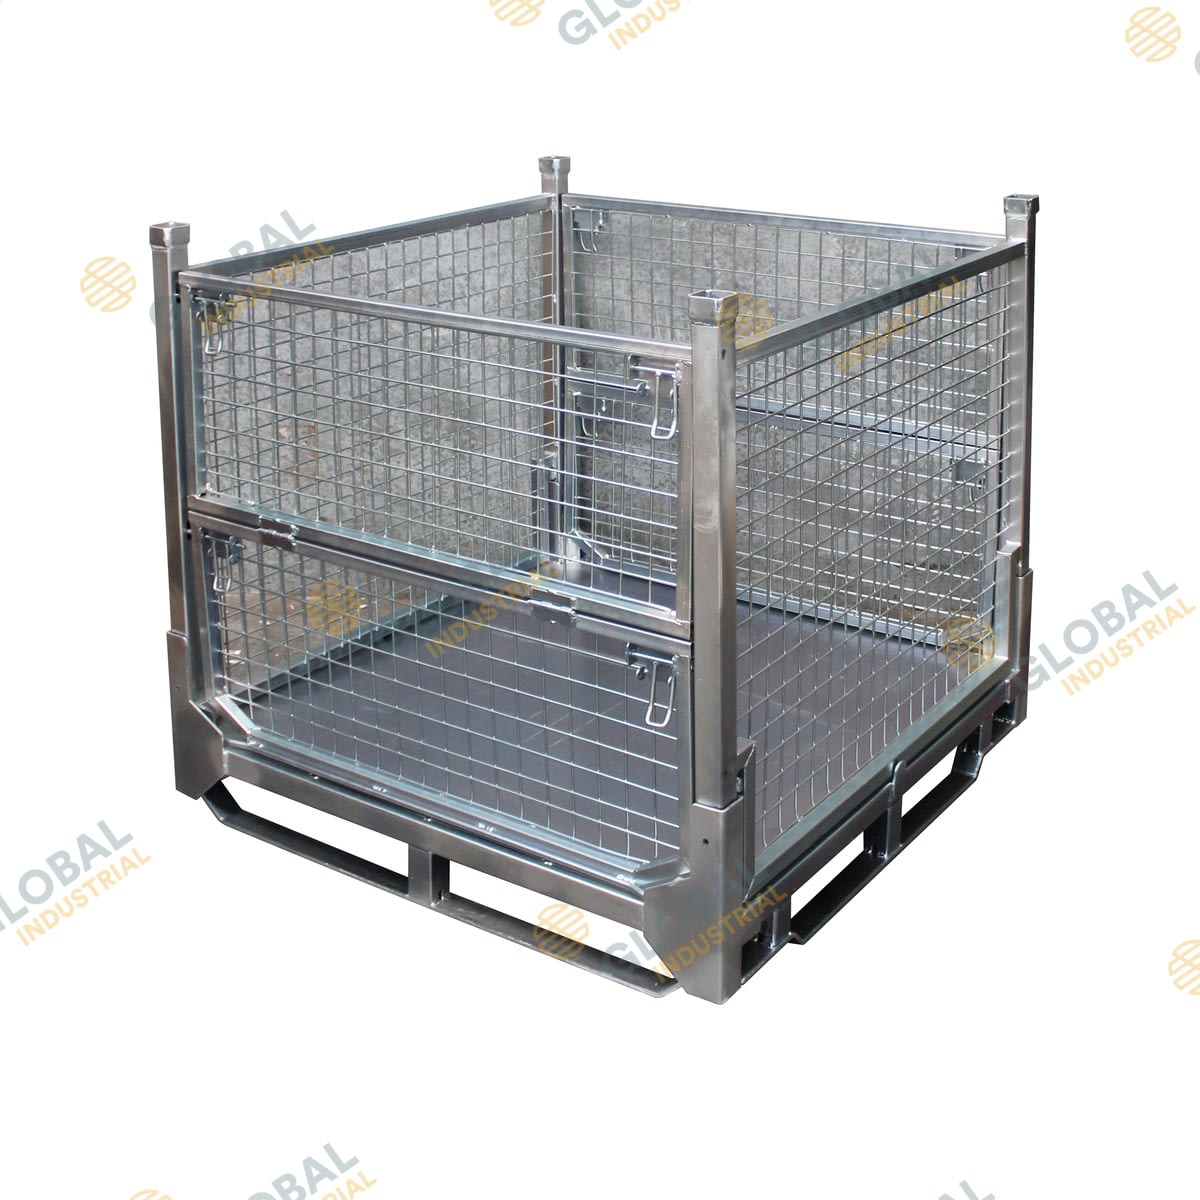 Equipment Cage Hire